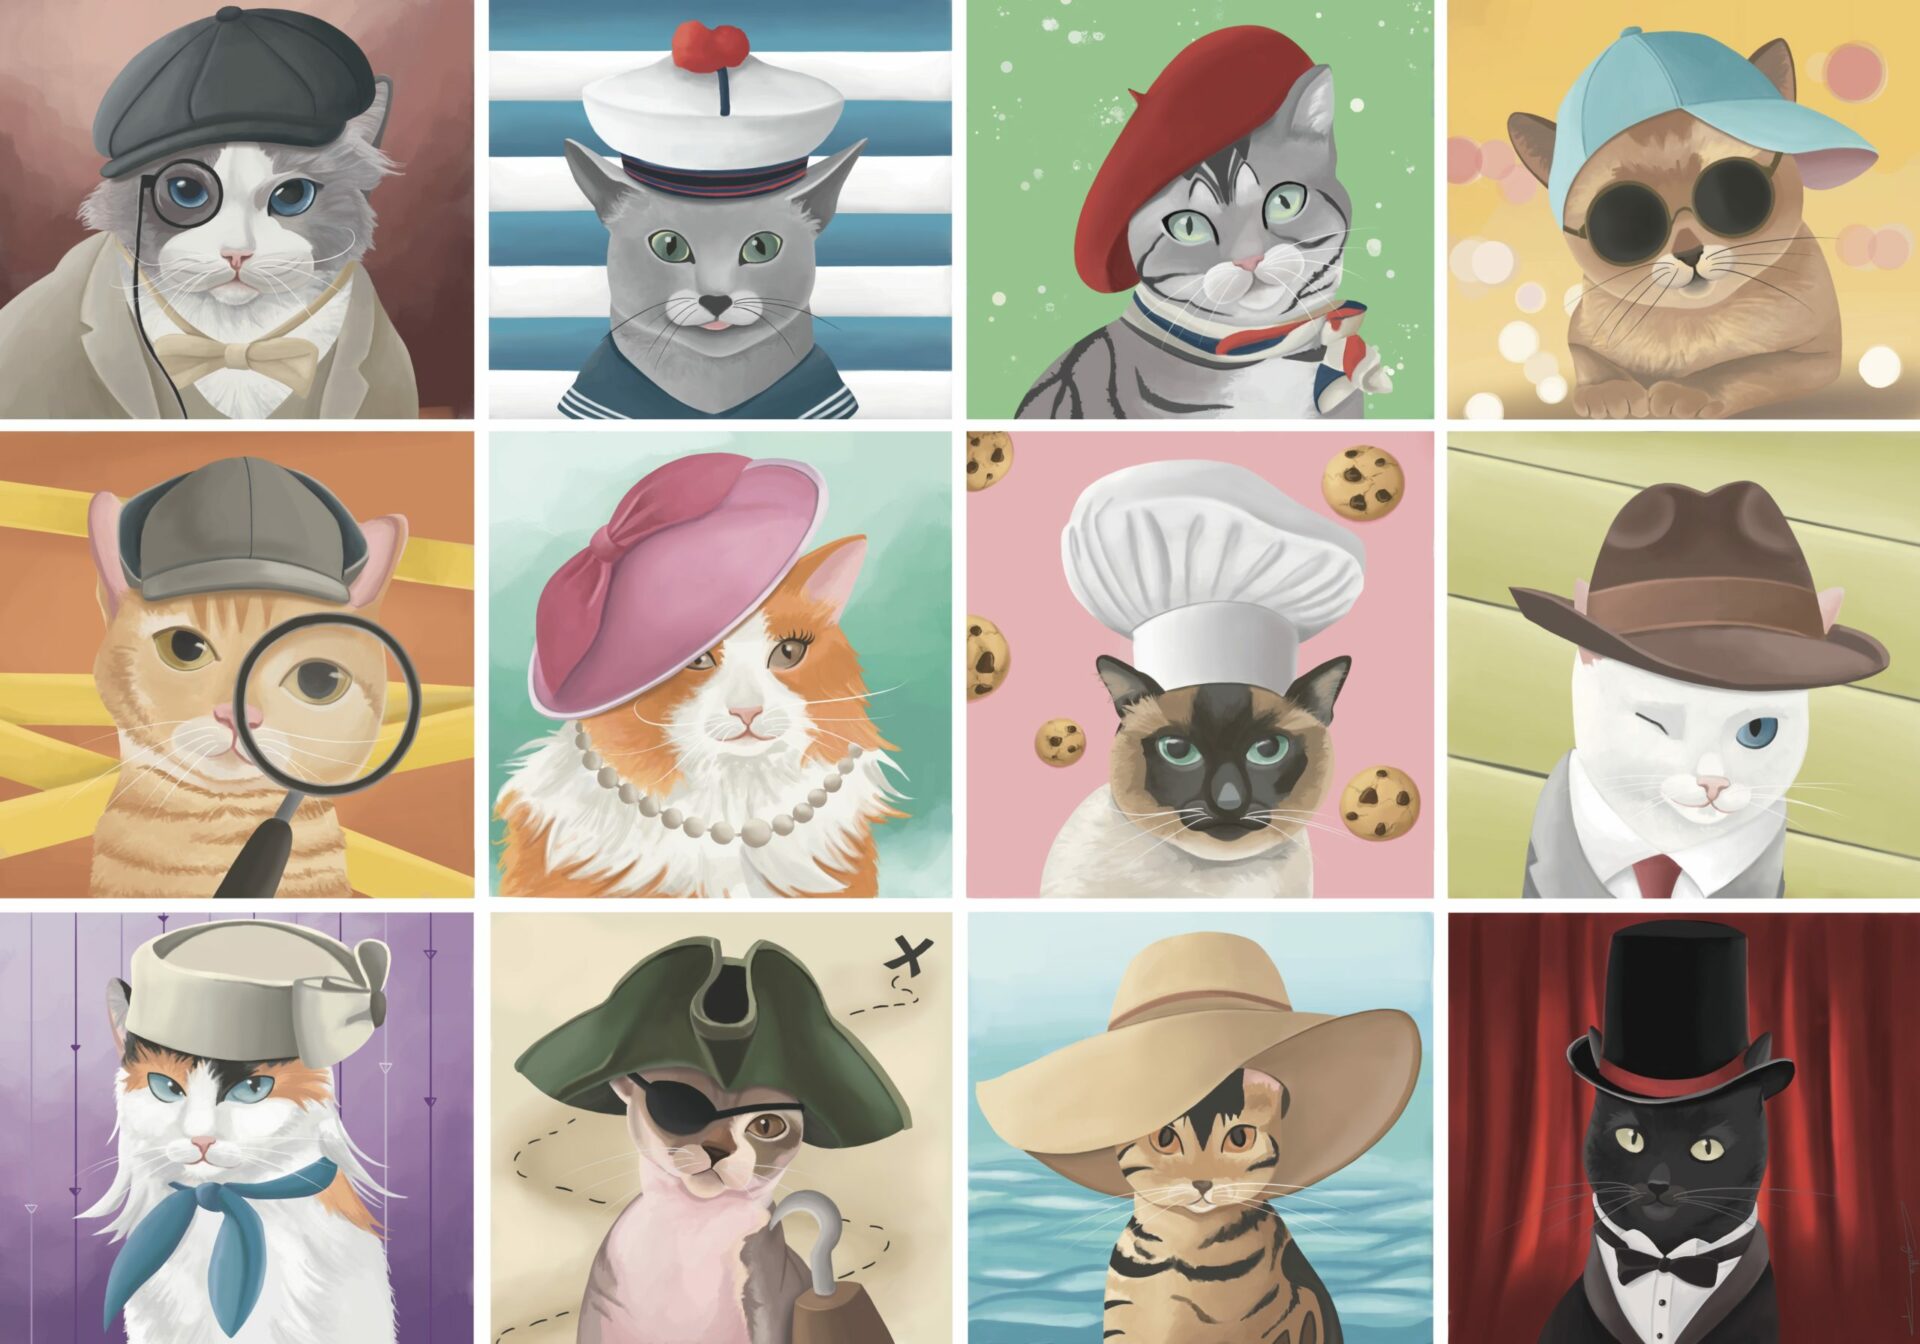 puzzle cats with hats illustration by Cynthia Artstudio